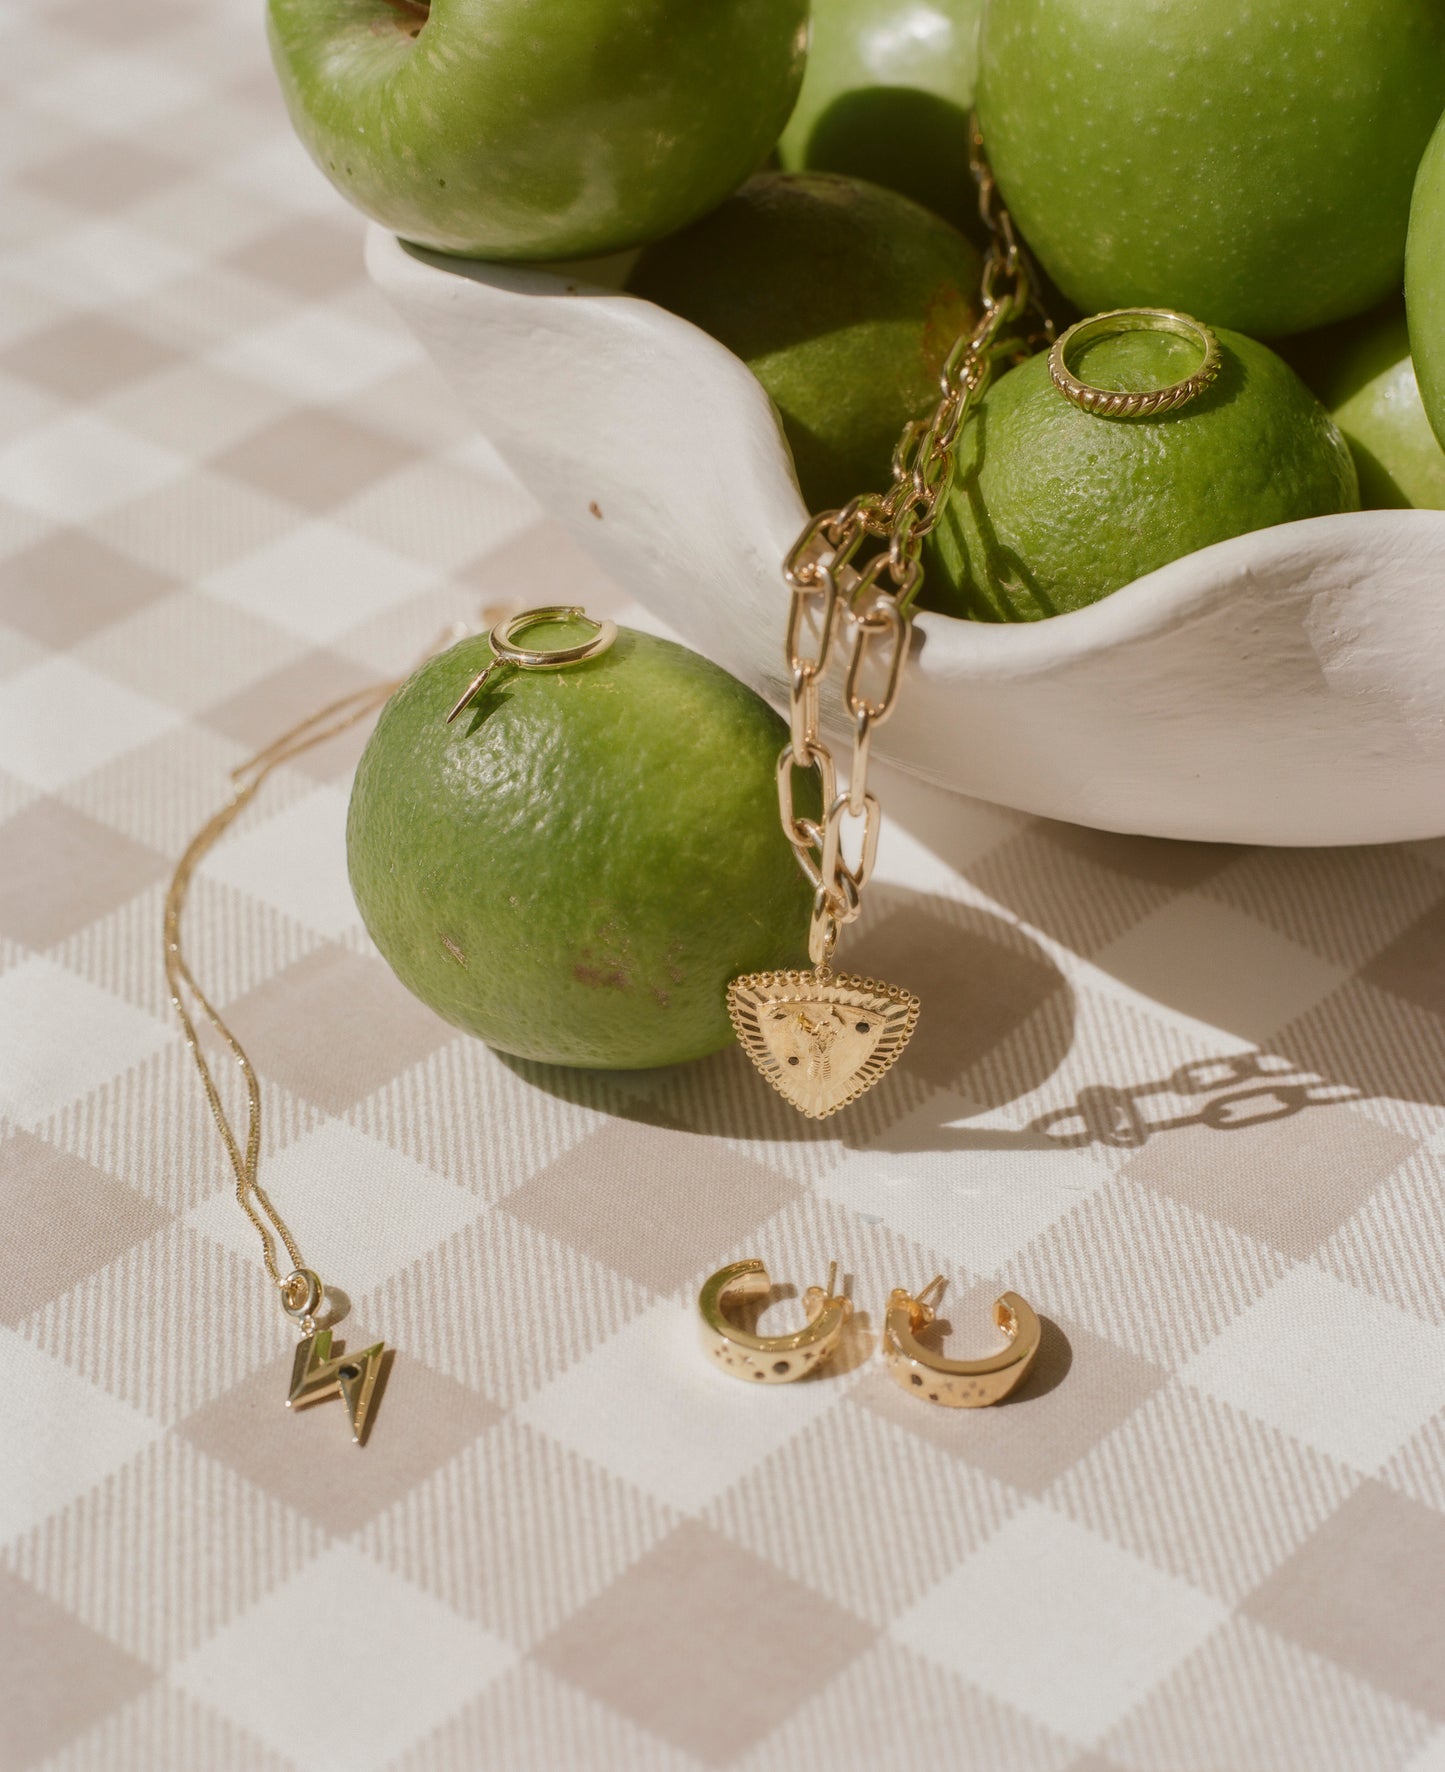 Gold jewellery and green apples